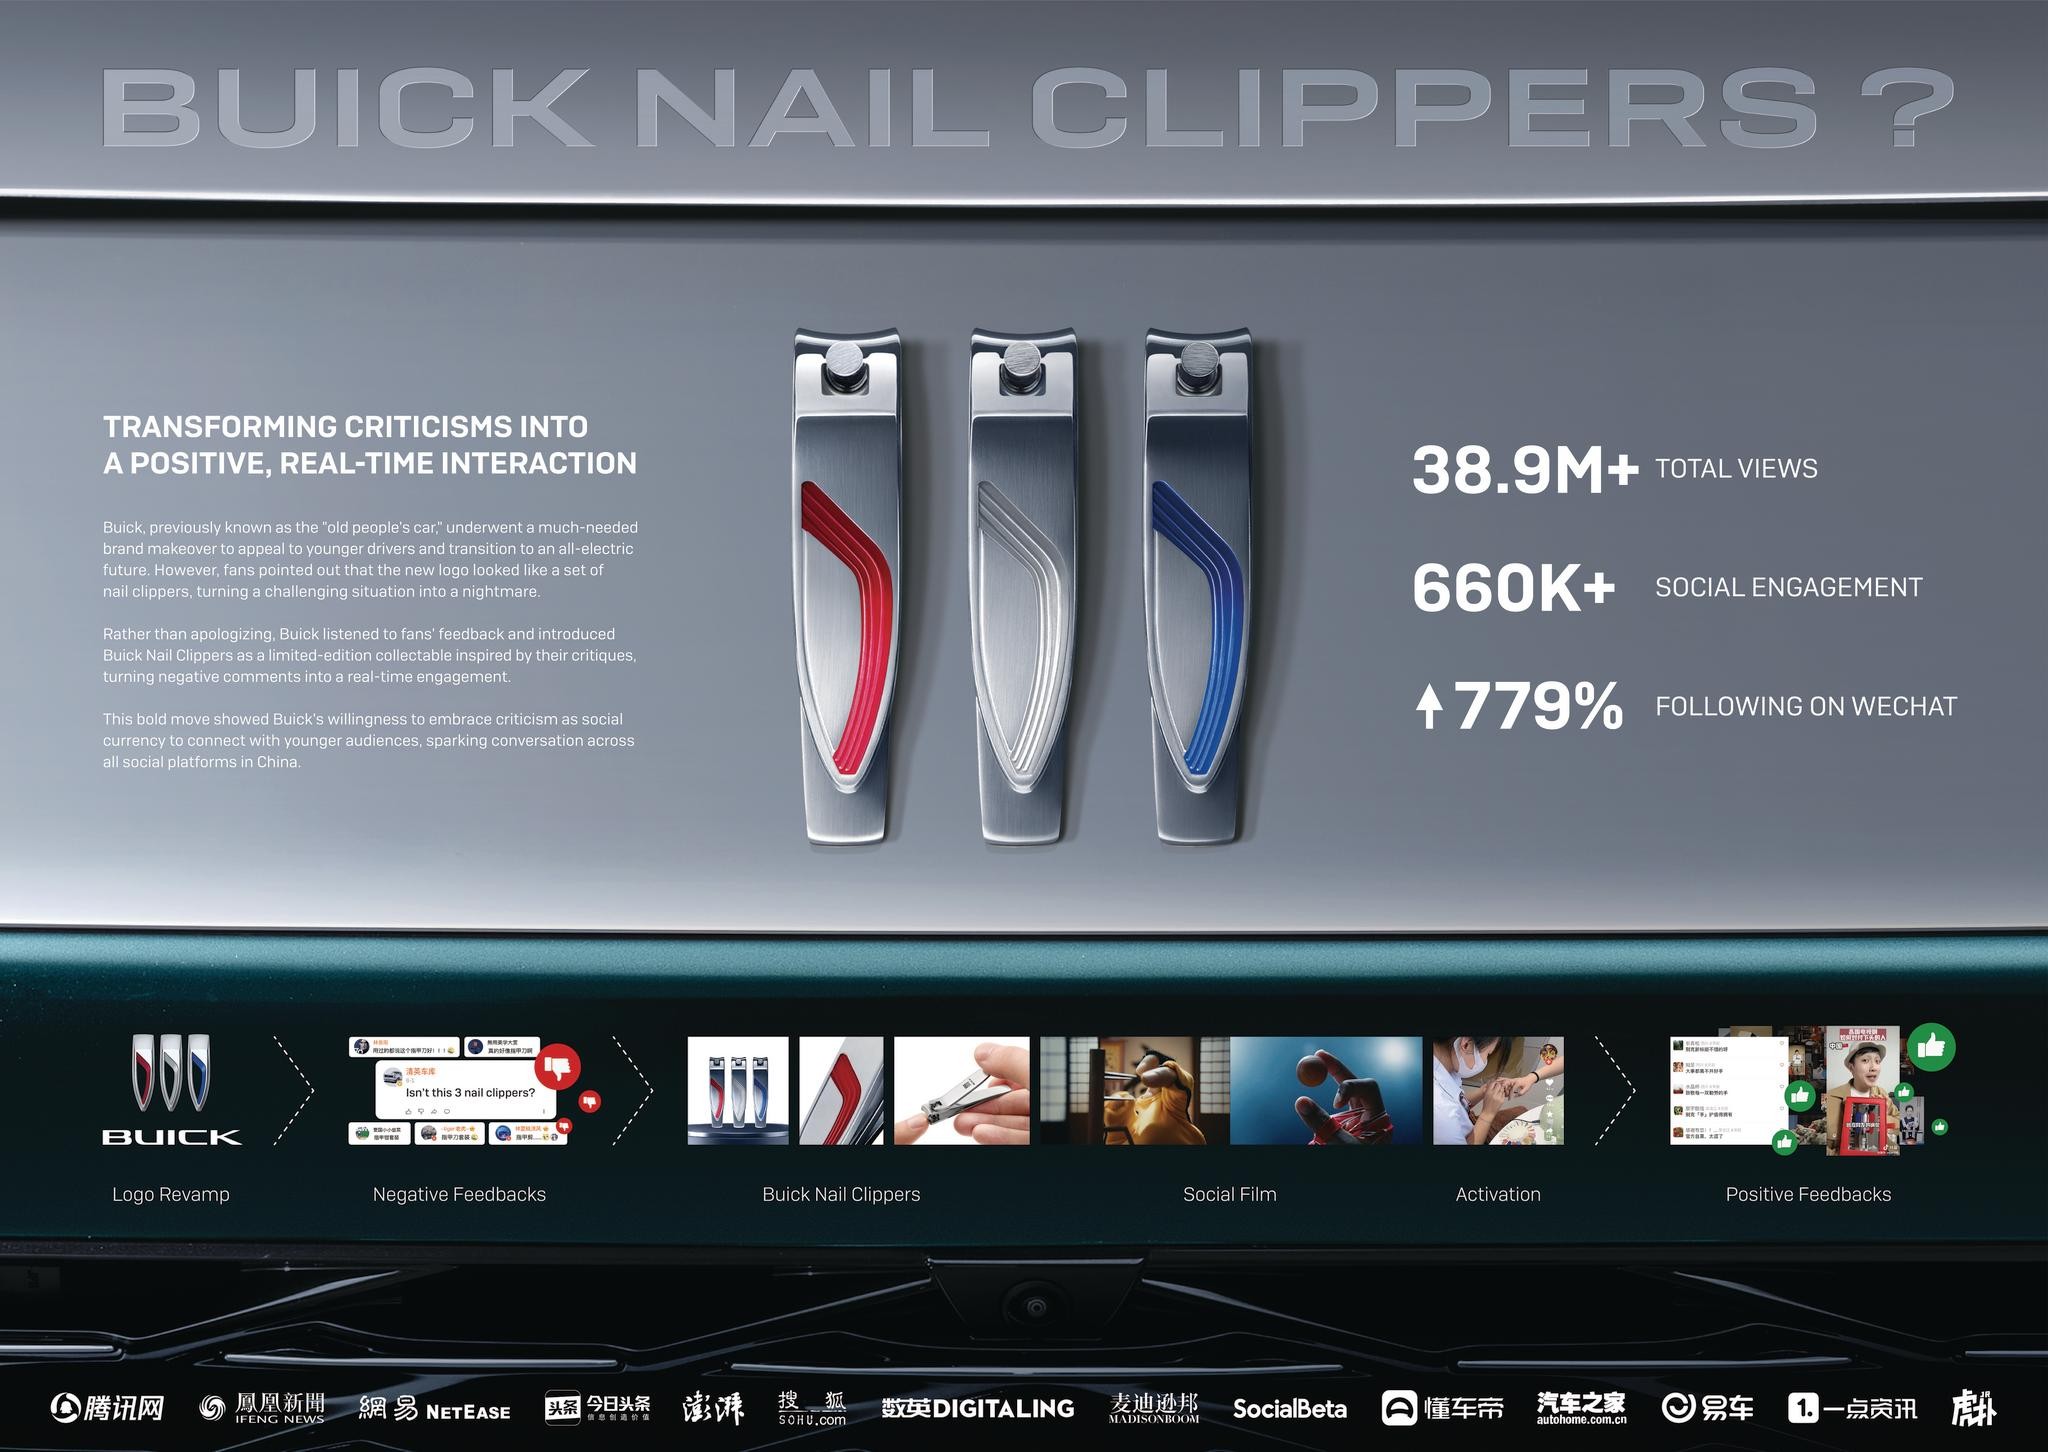 BUICK NAIL CLIPPERS